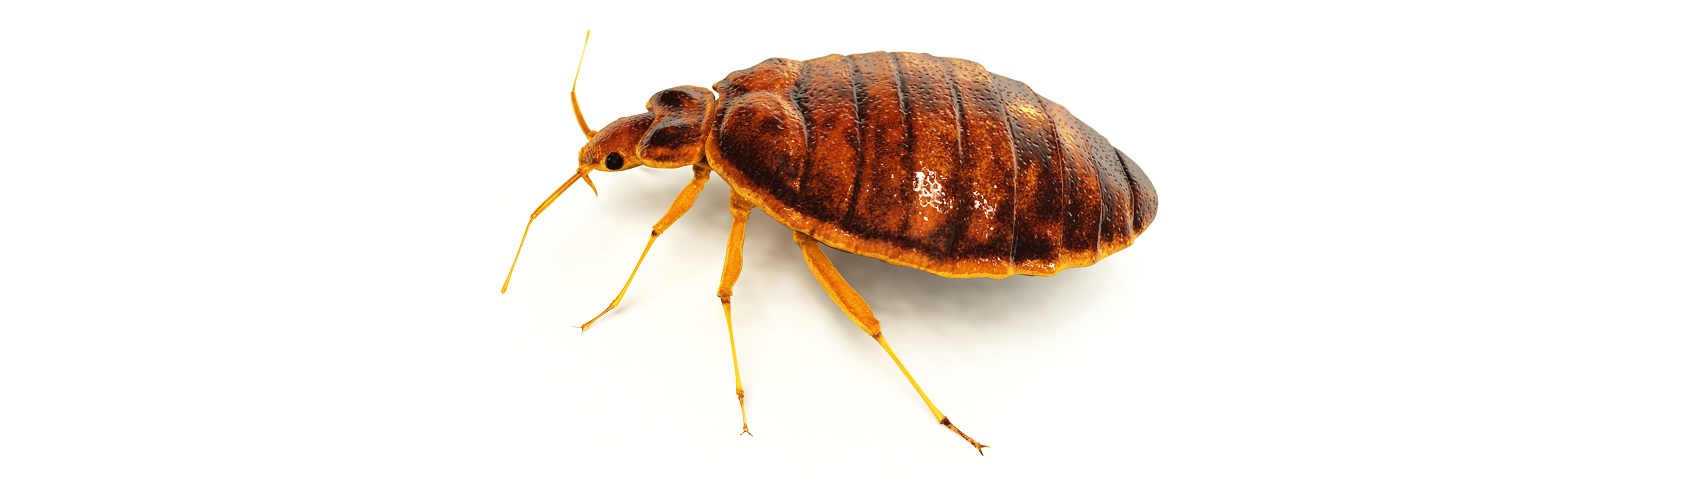 Bed Bugs Control Melbourne